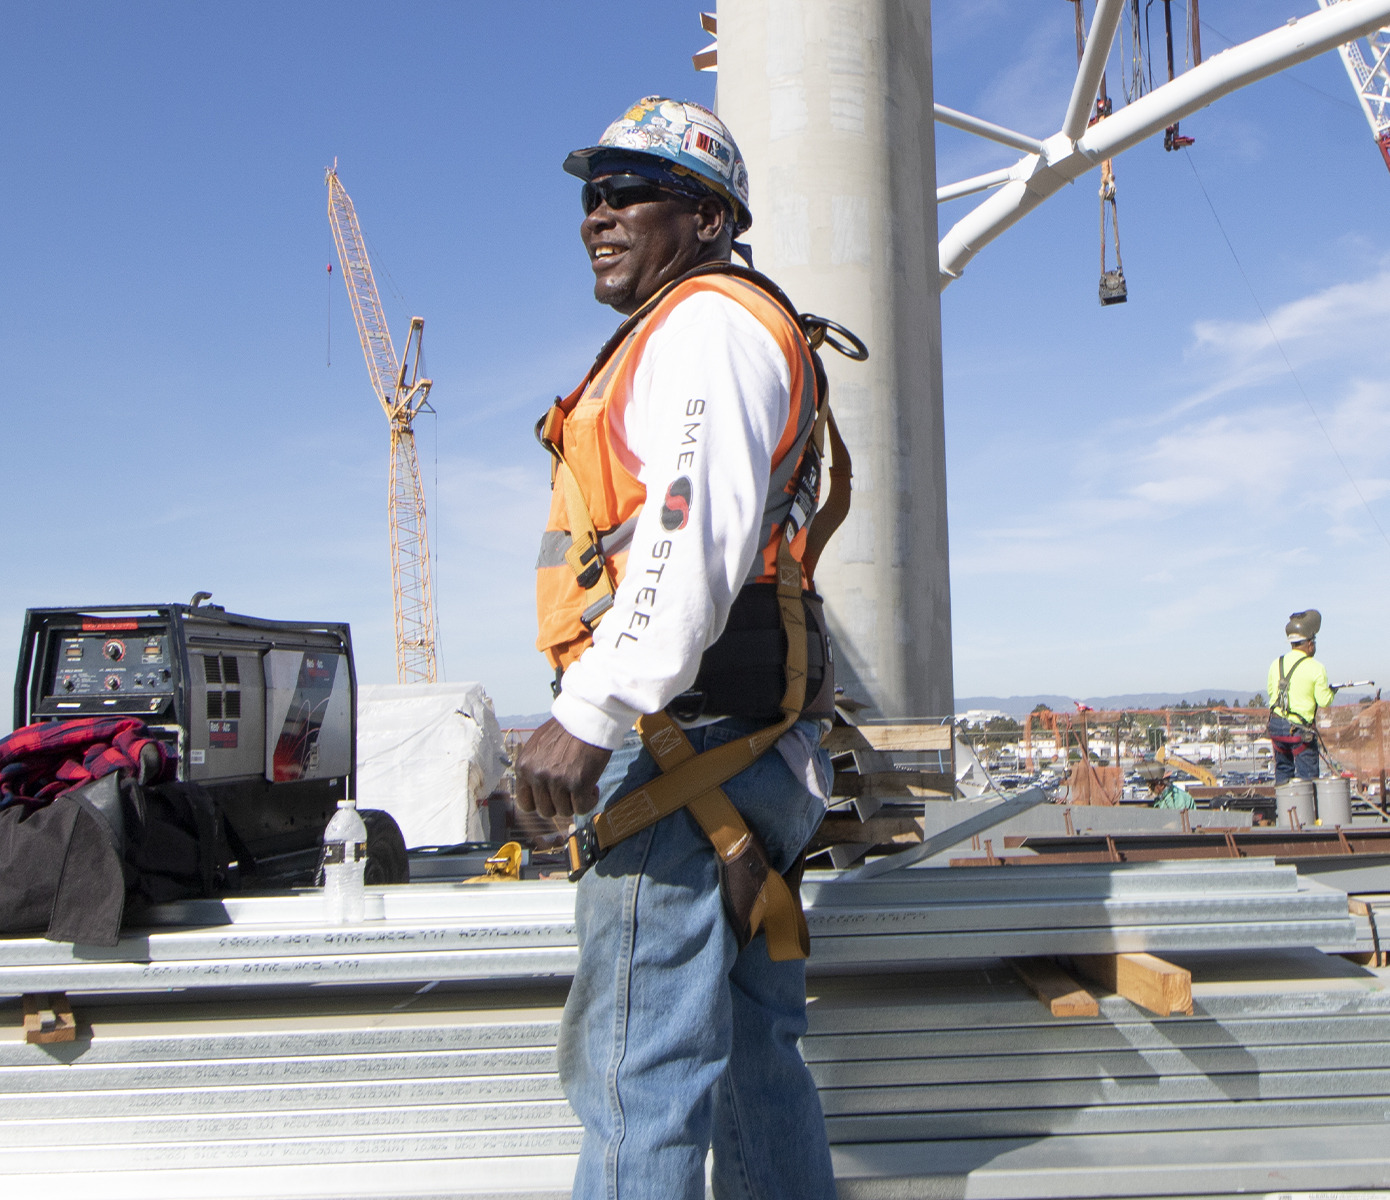 Construction professional workers wear safety harnesses and safety